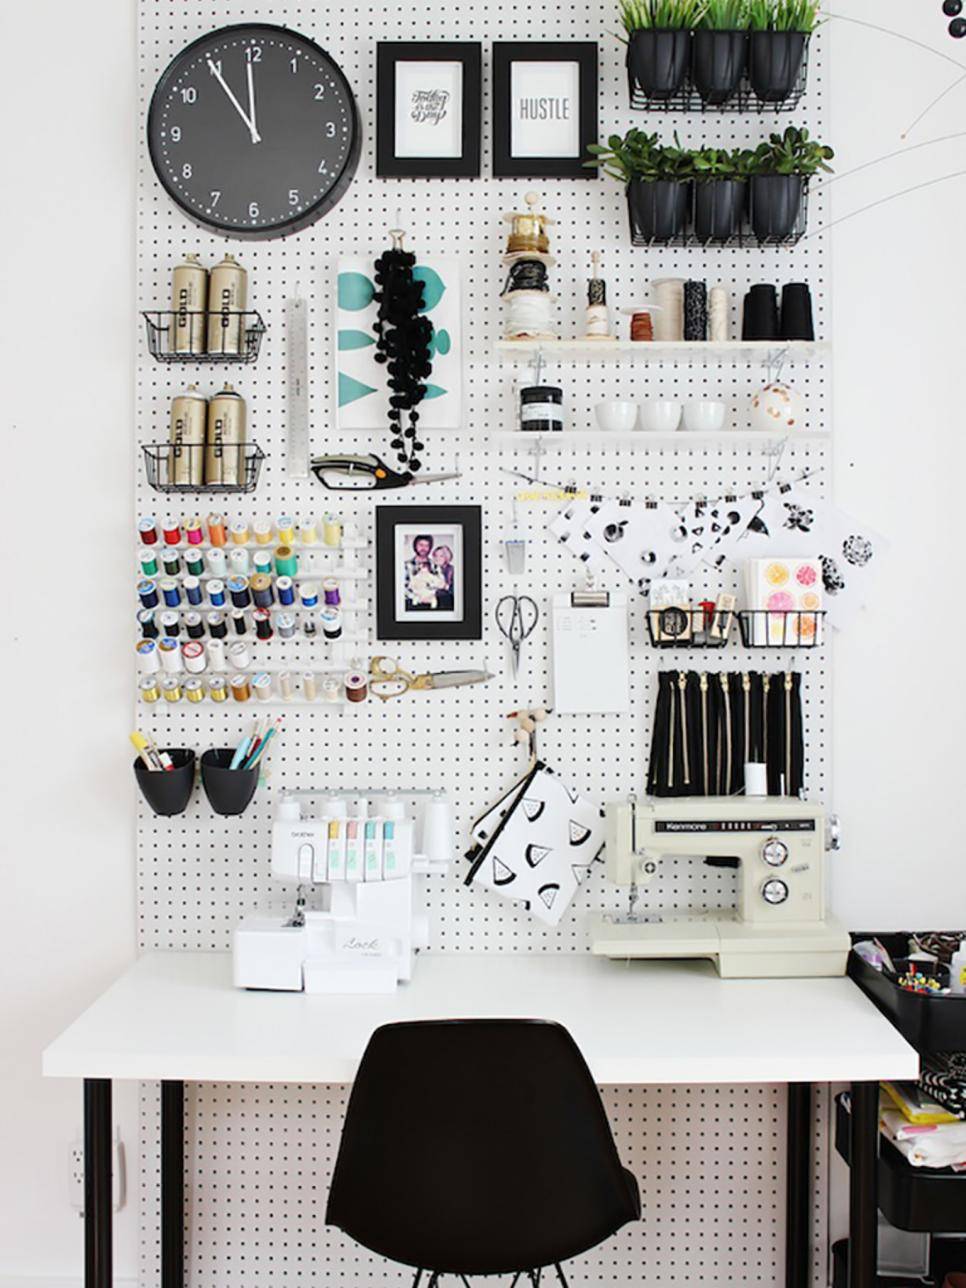 Use pegboard to organize your home (from HGTV)